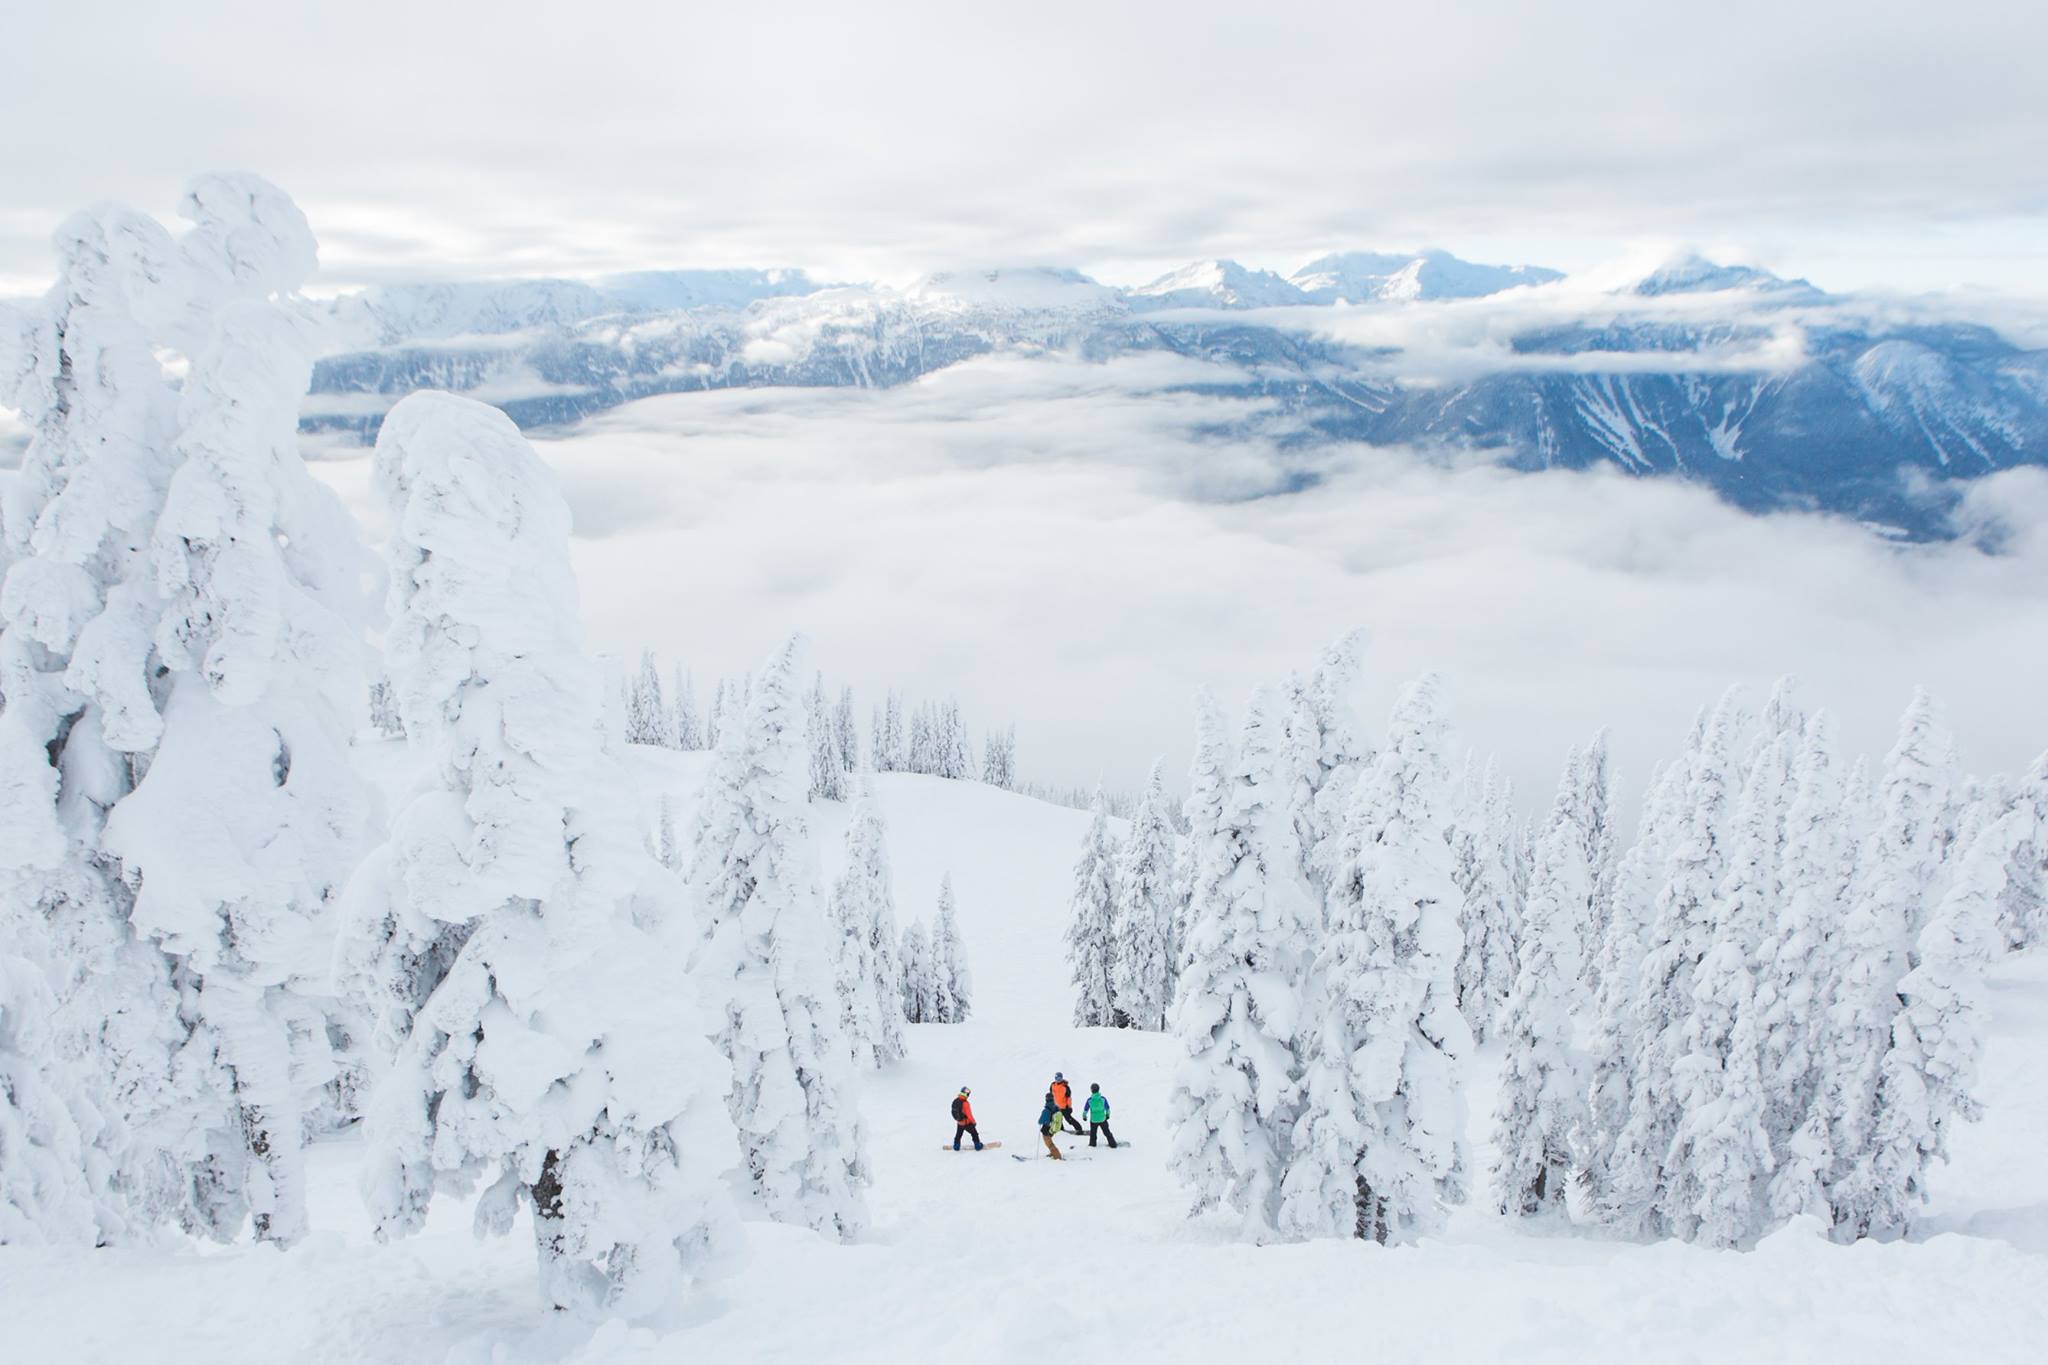 Which Resorts Have The Most Snow For Christmas 2016?